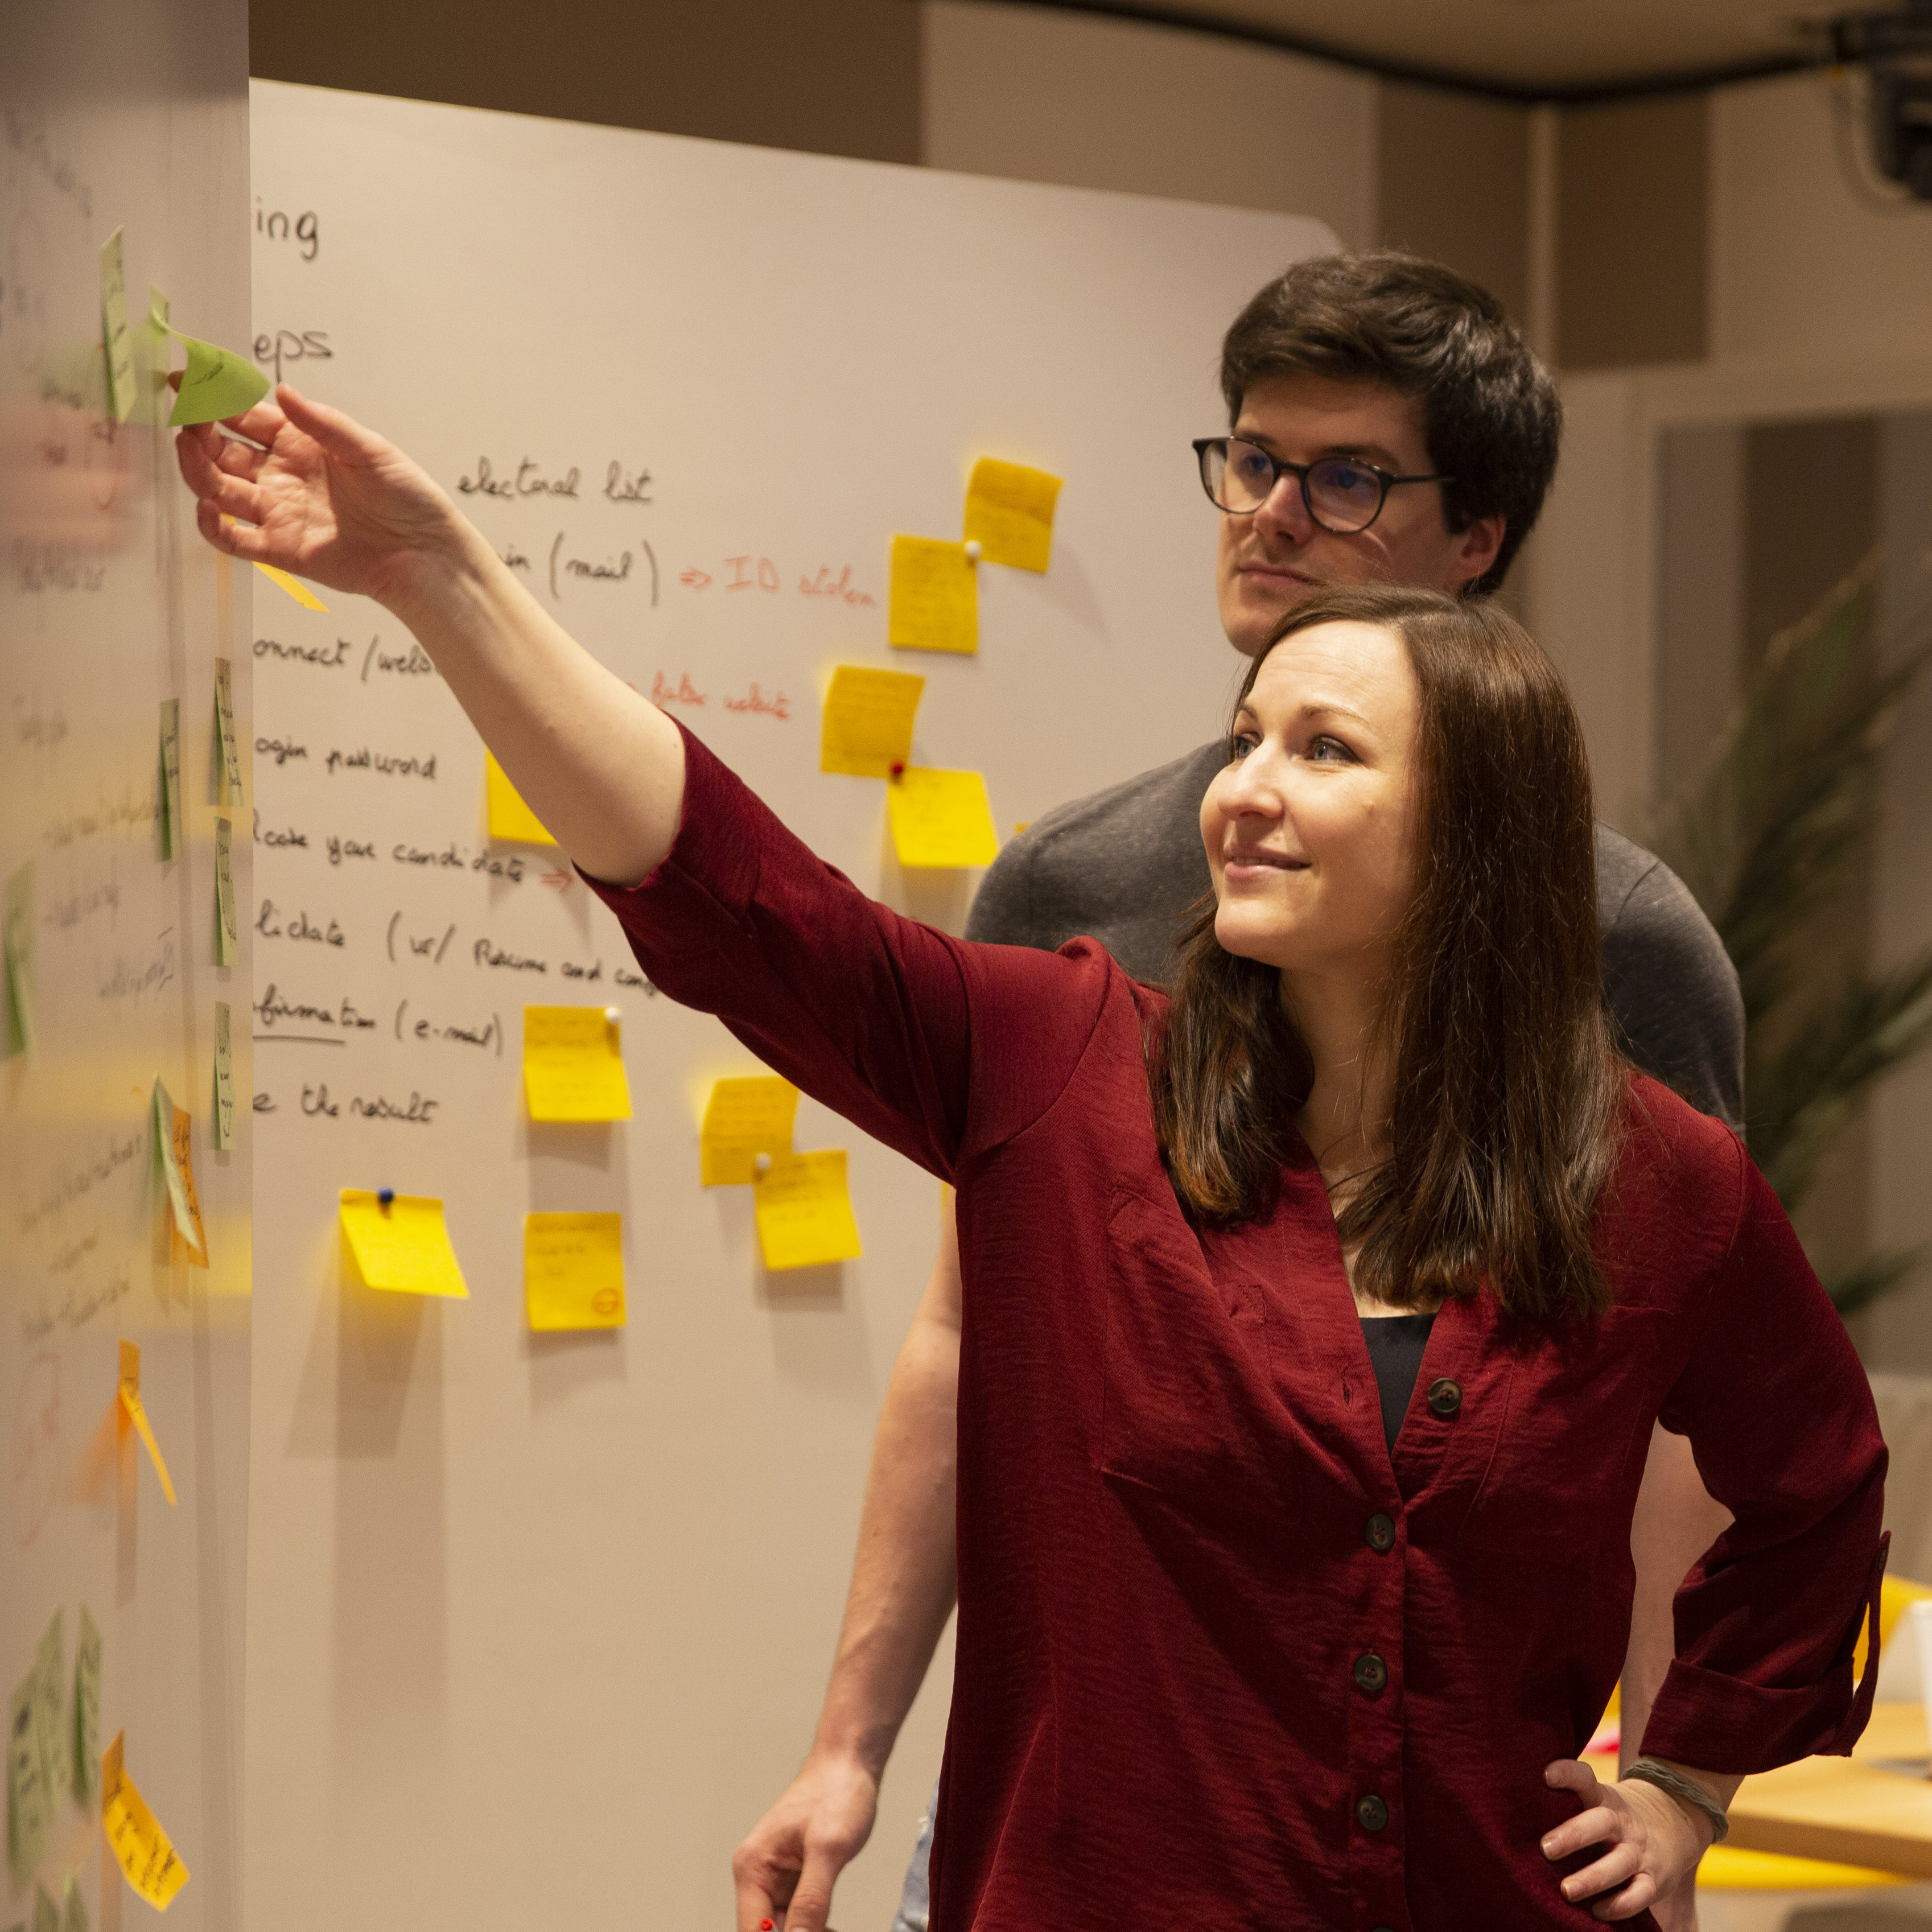 Two team members working on a whiteboard with post-its